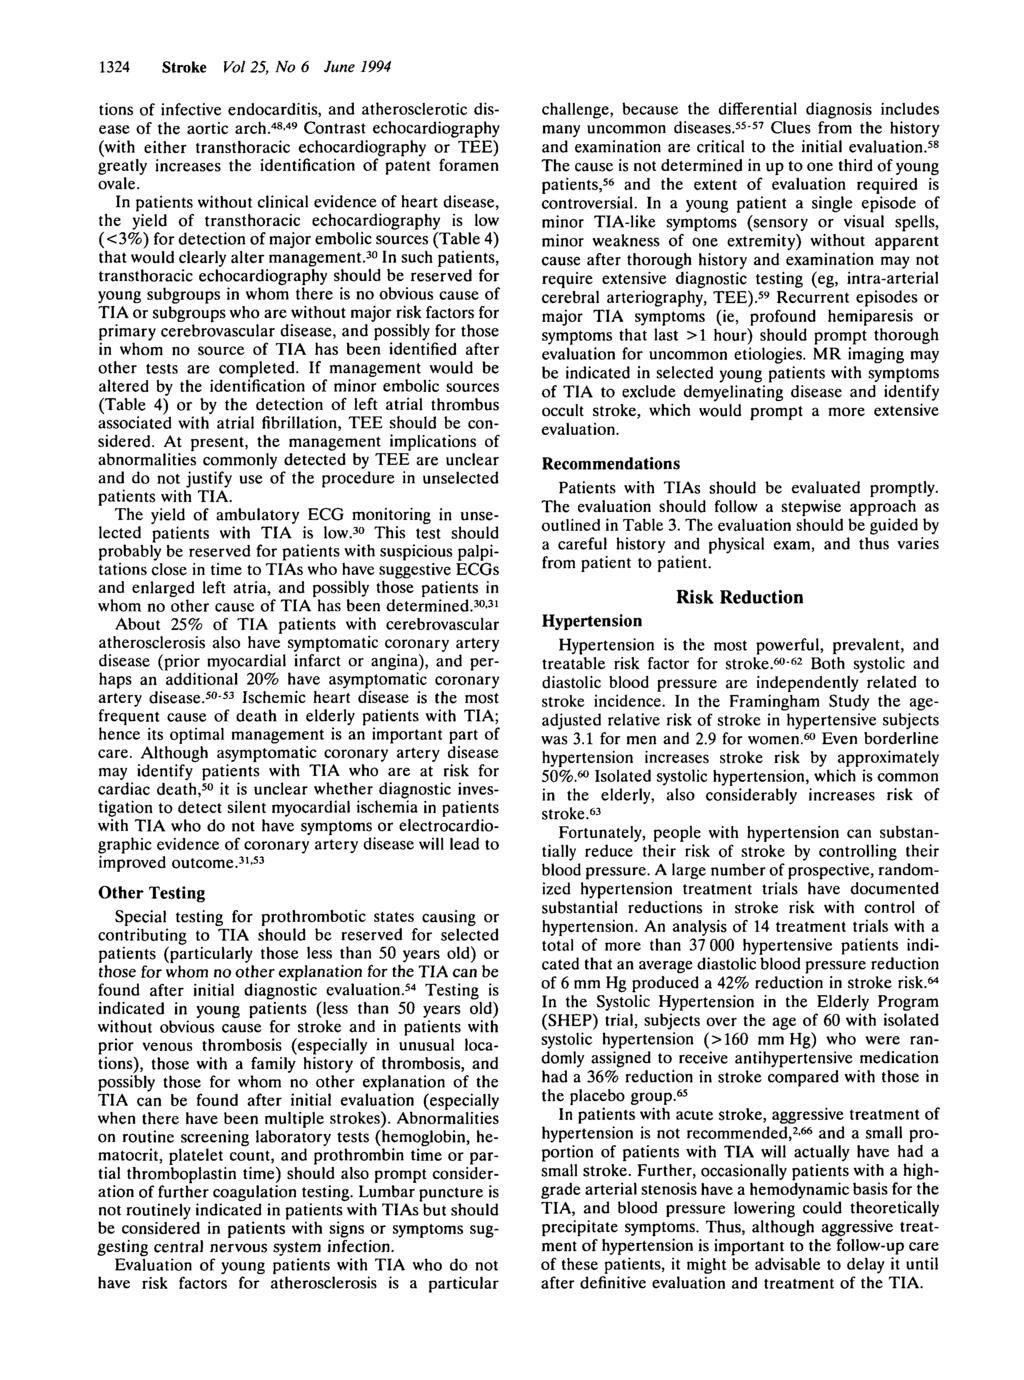 1324 Stroke Vol 25, No 6 June 1994 tions of infective endocarditis, and atherosclerotic disease of the aortic arch.